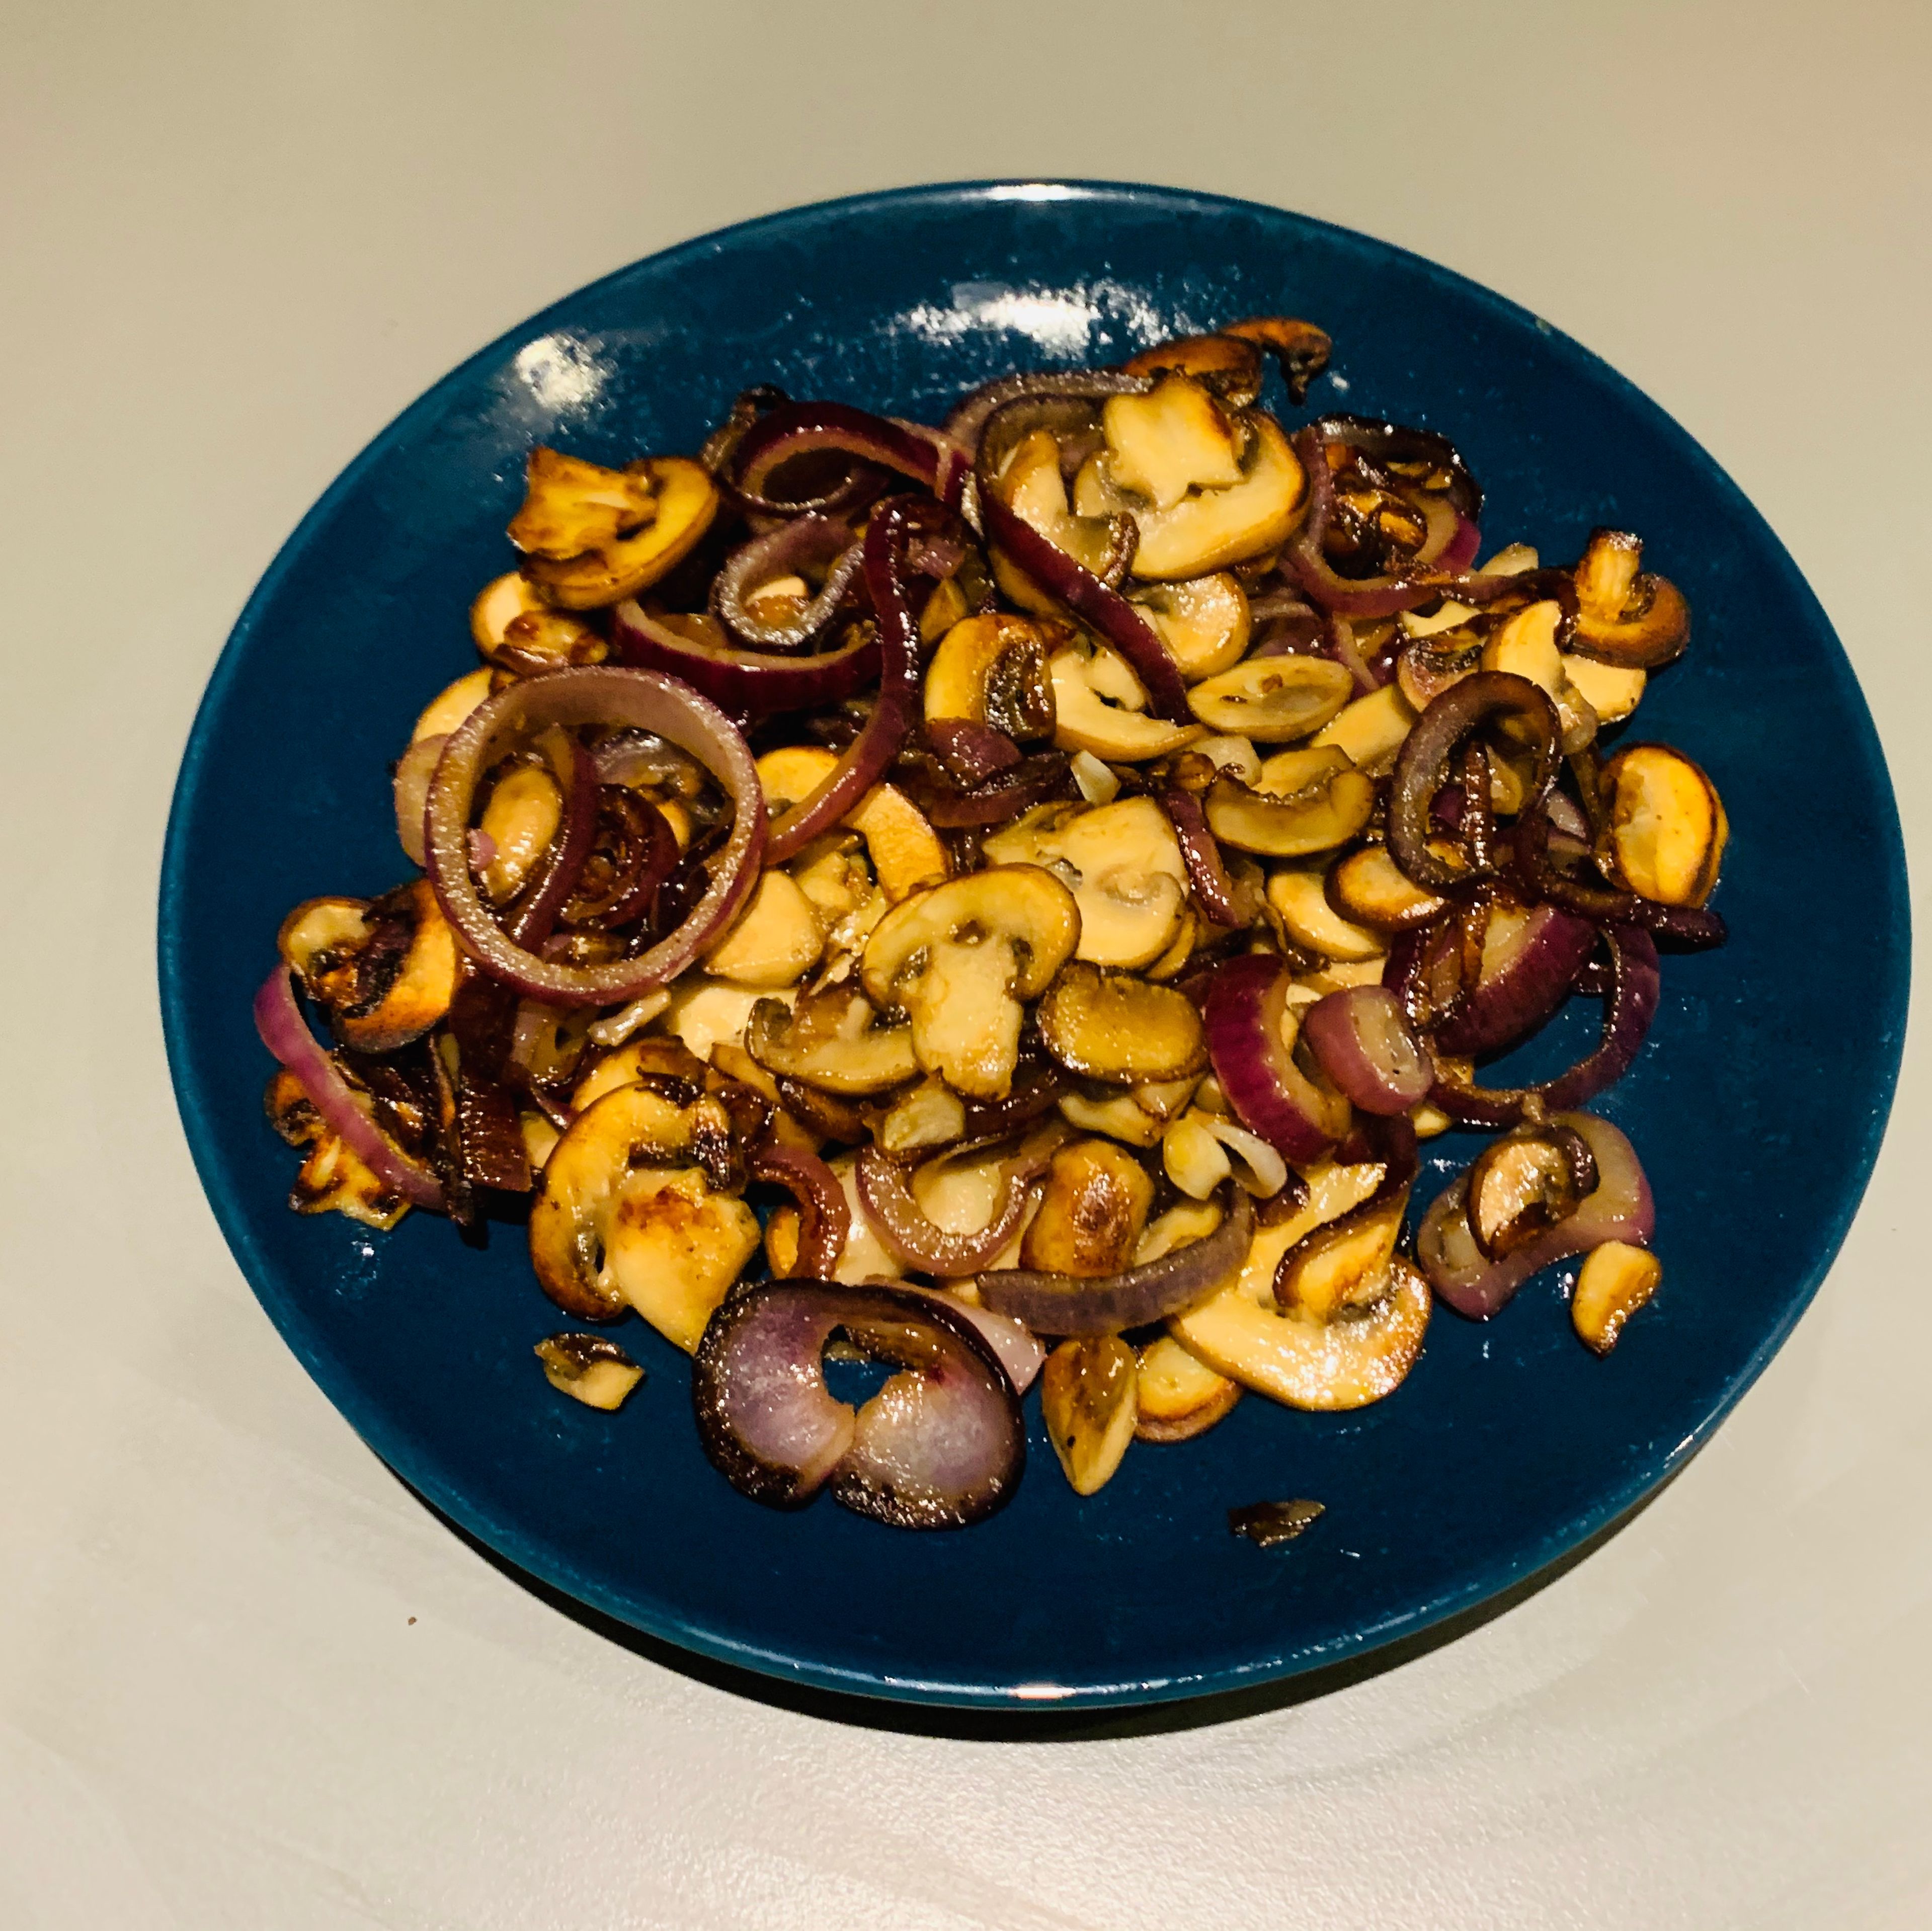 Lightly roast the onions and mushrooms in a pan